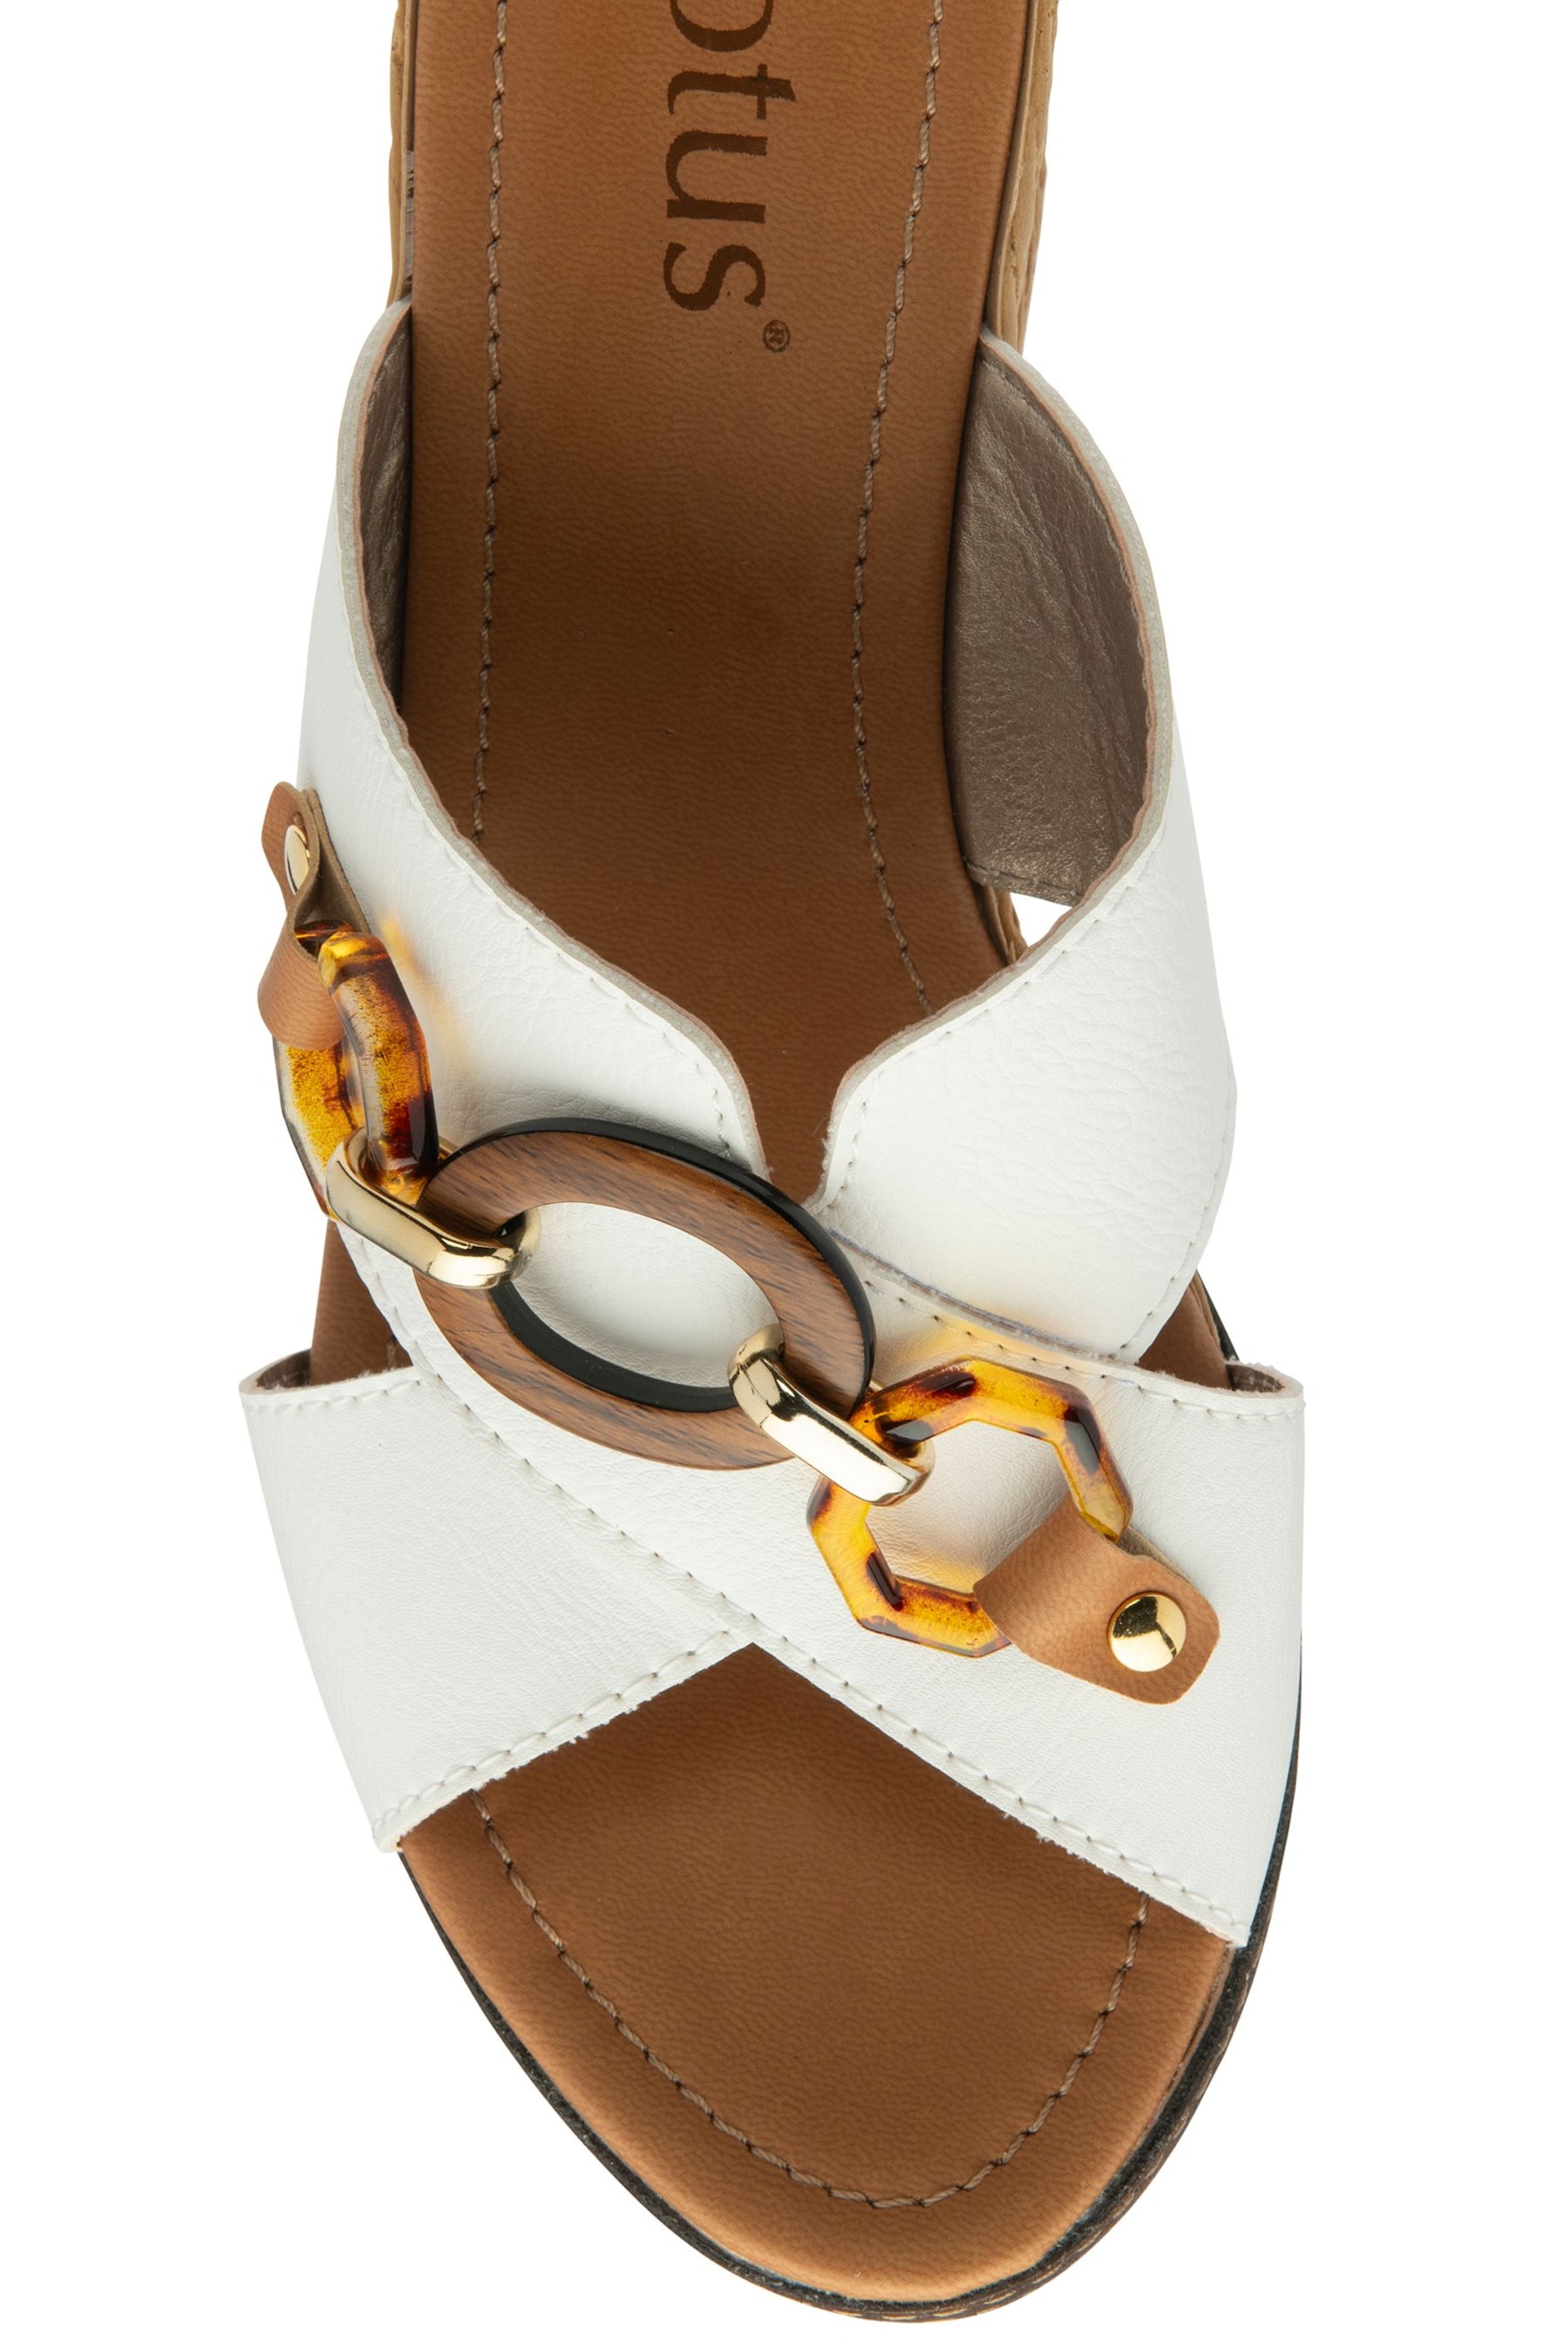 Lotus White Casual Wedge Mule Sandals - Image 4 of 4